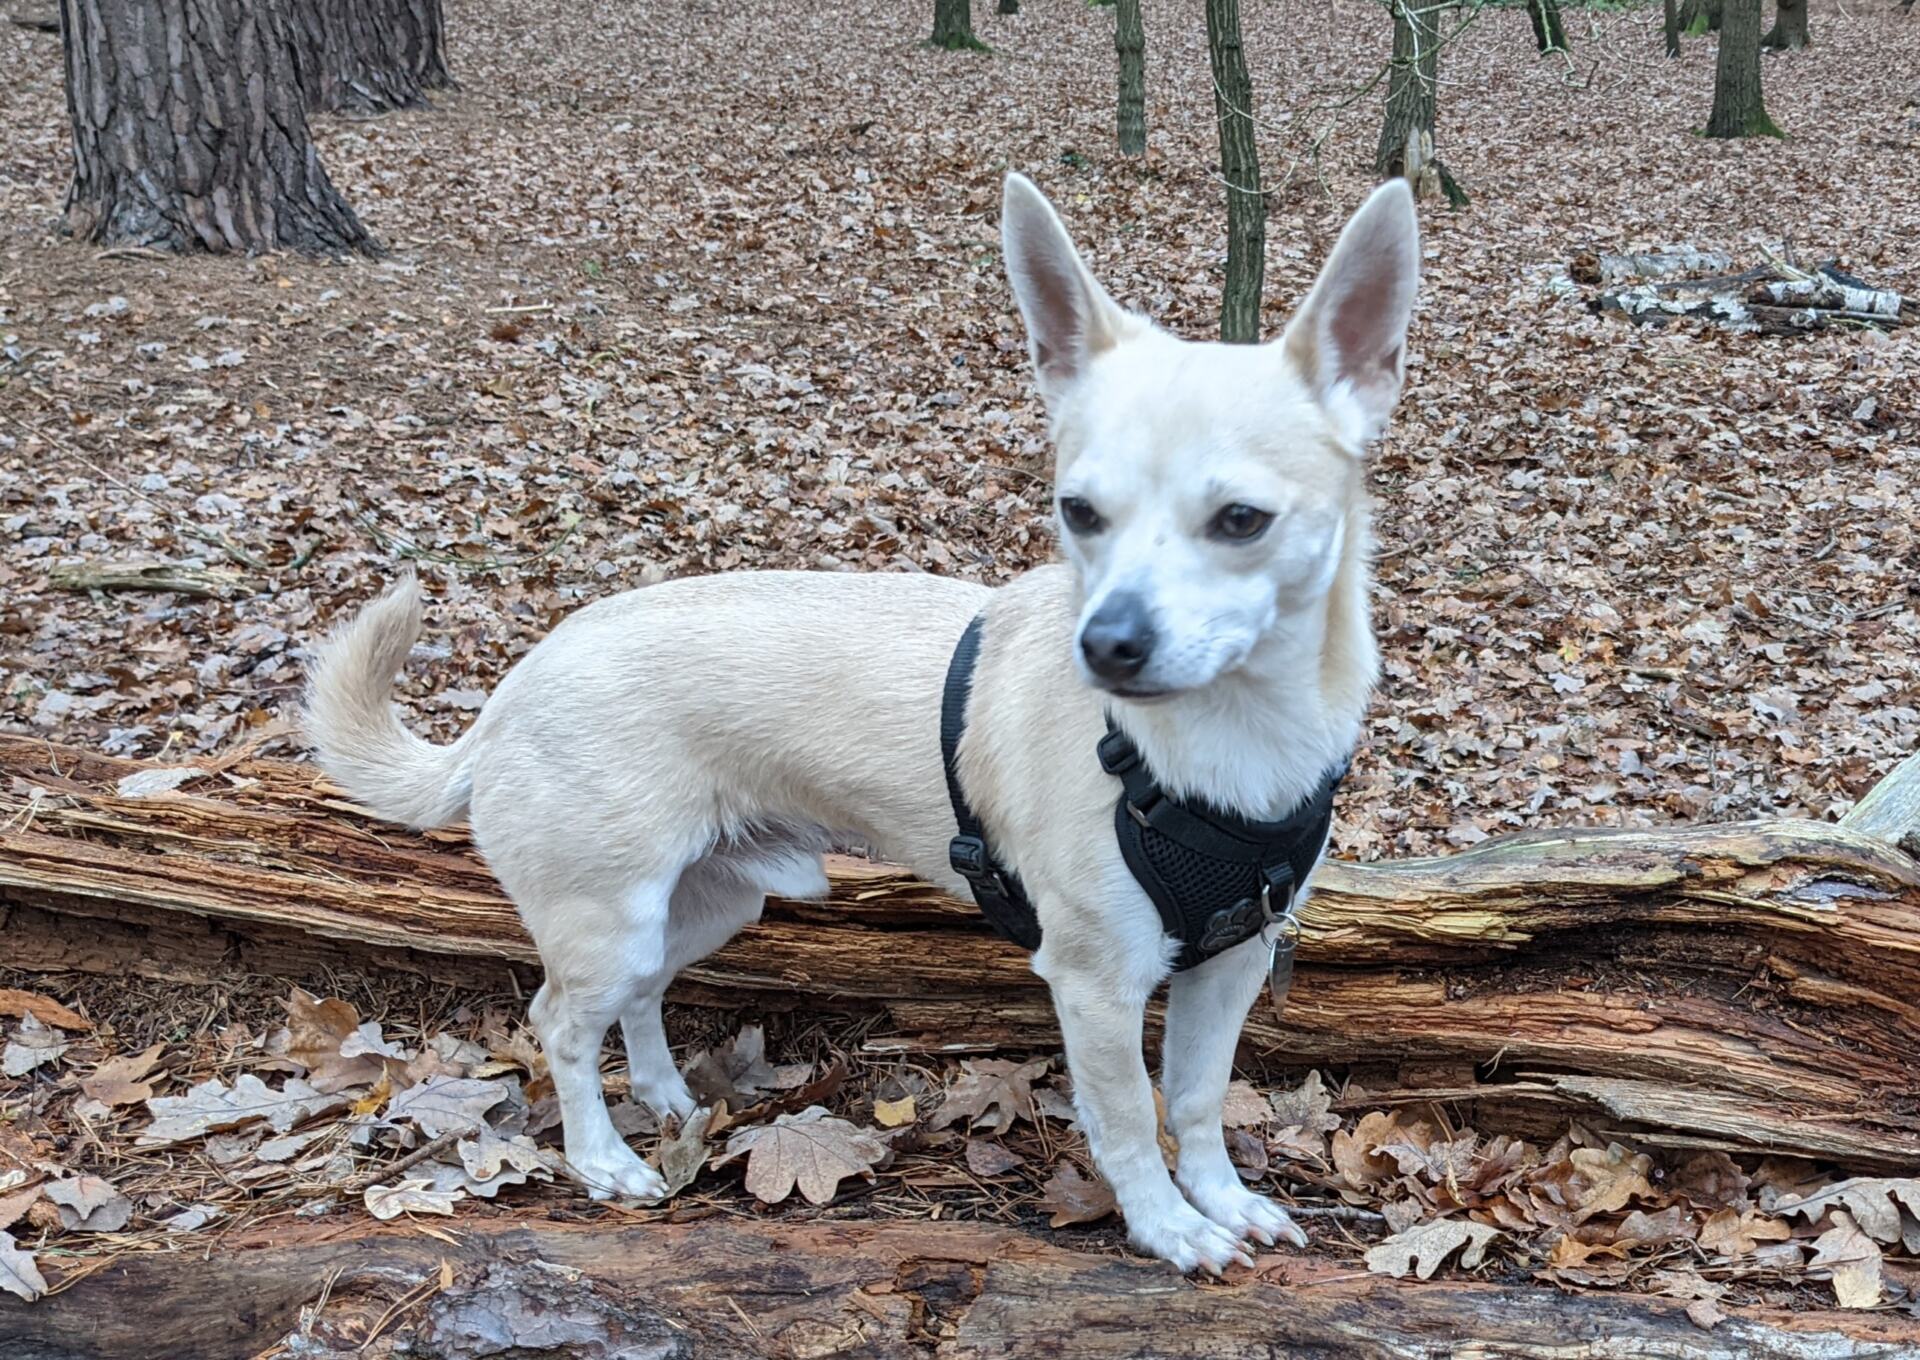 Get stress-free walks with your chihuahua